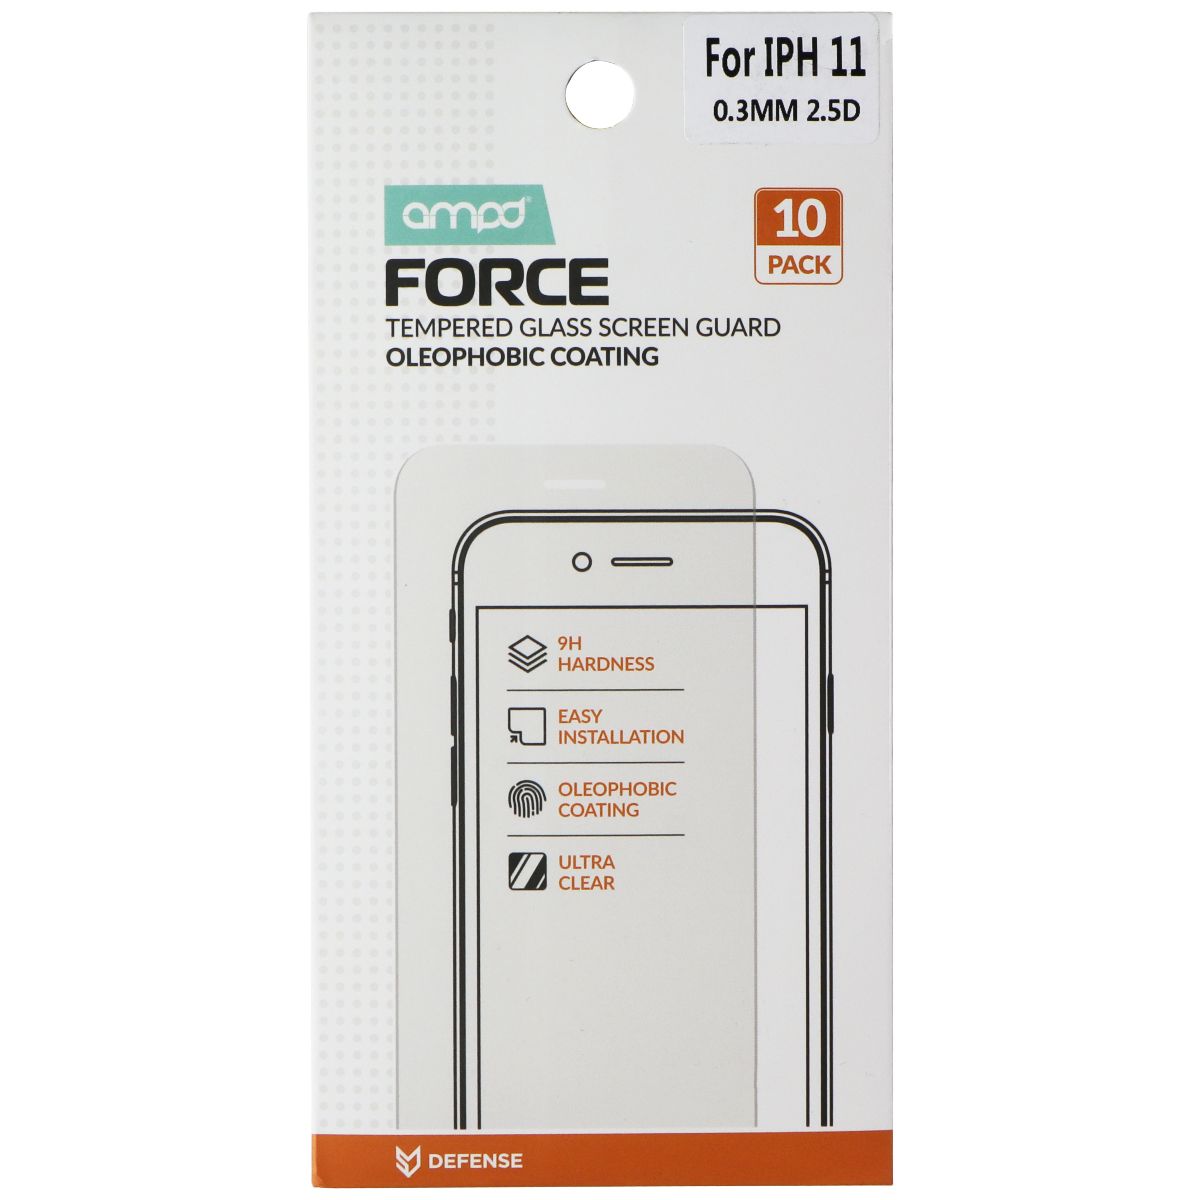 Ampd Force Tempered Glass Screen Guard for Apple iPhone 11 - Clear